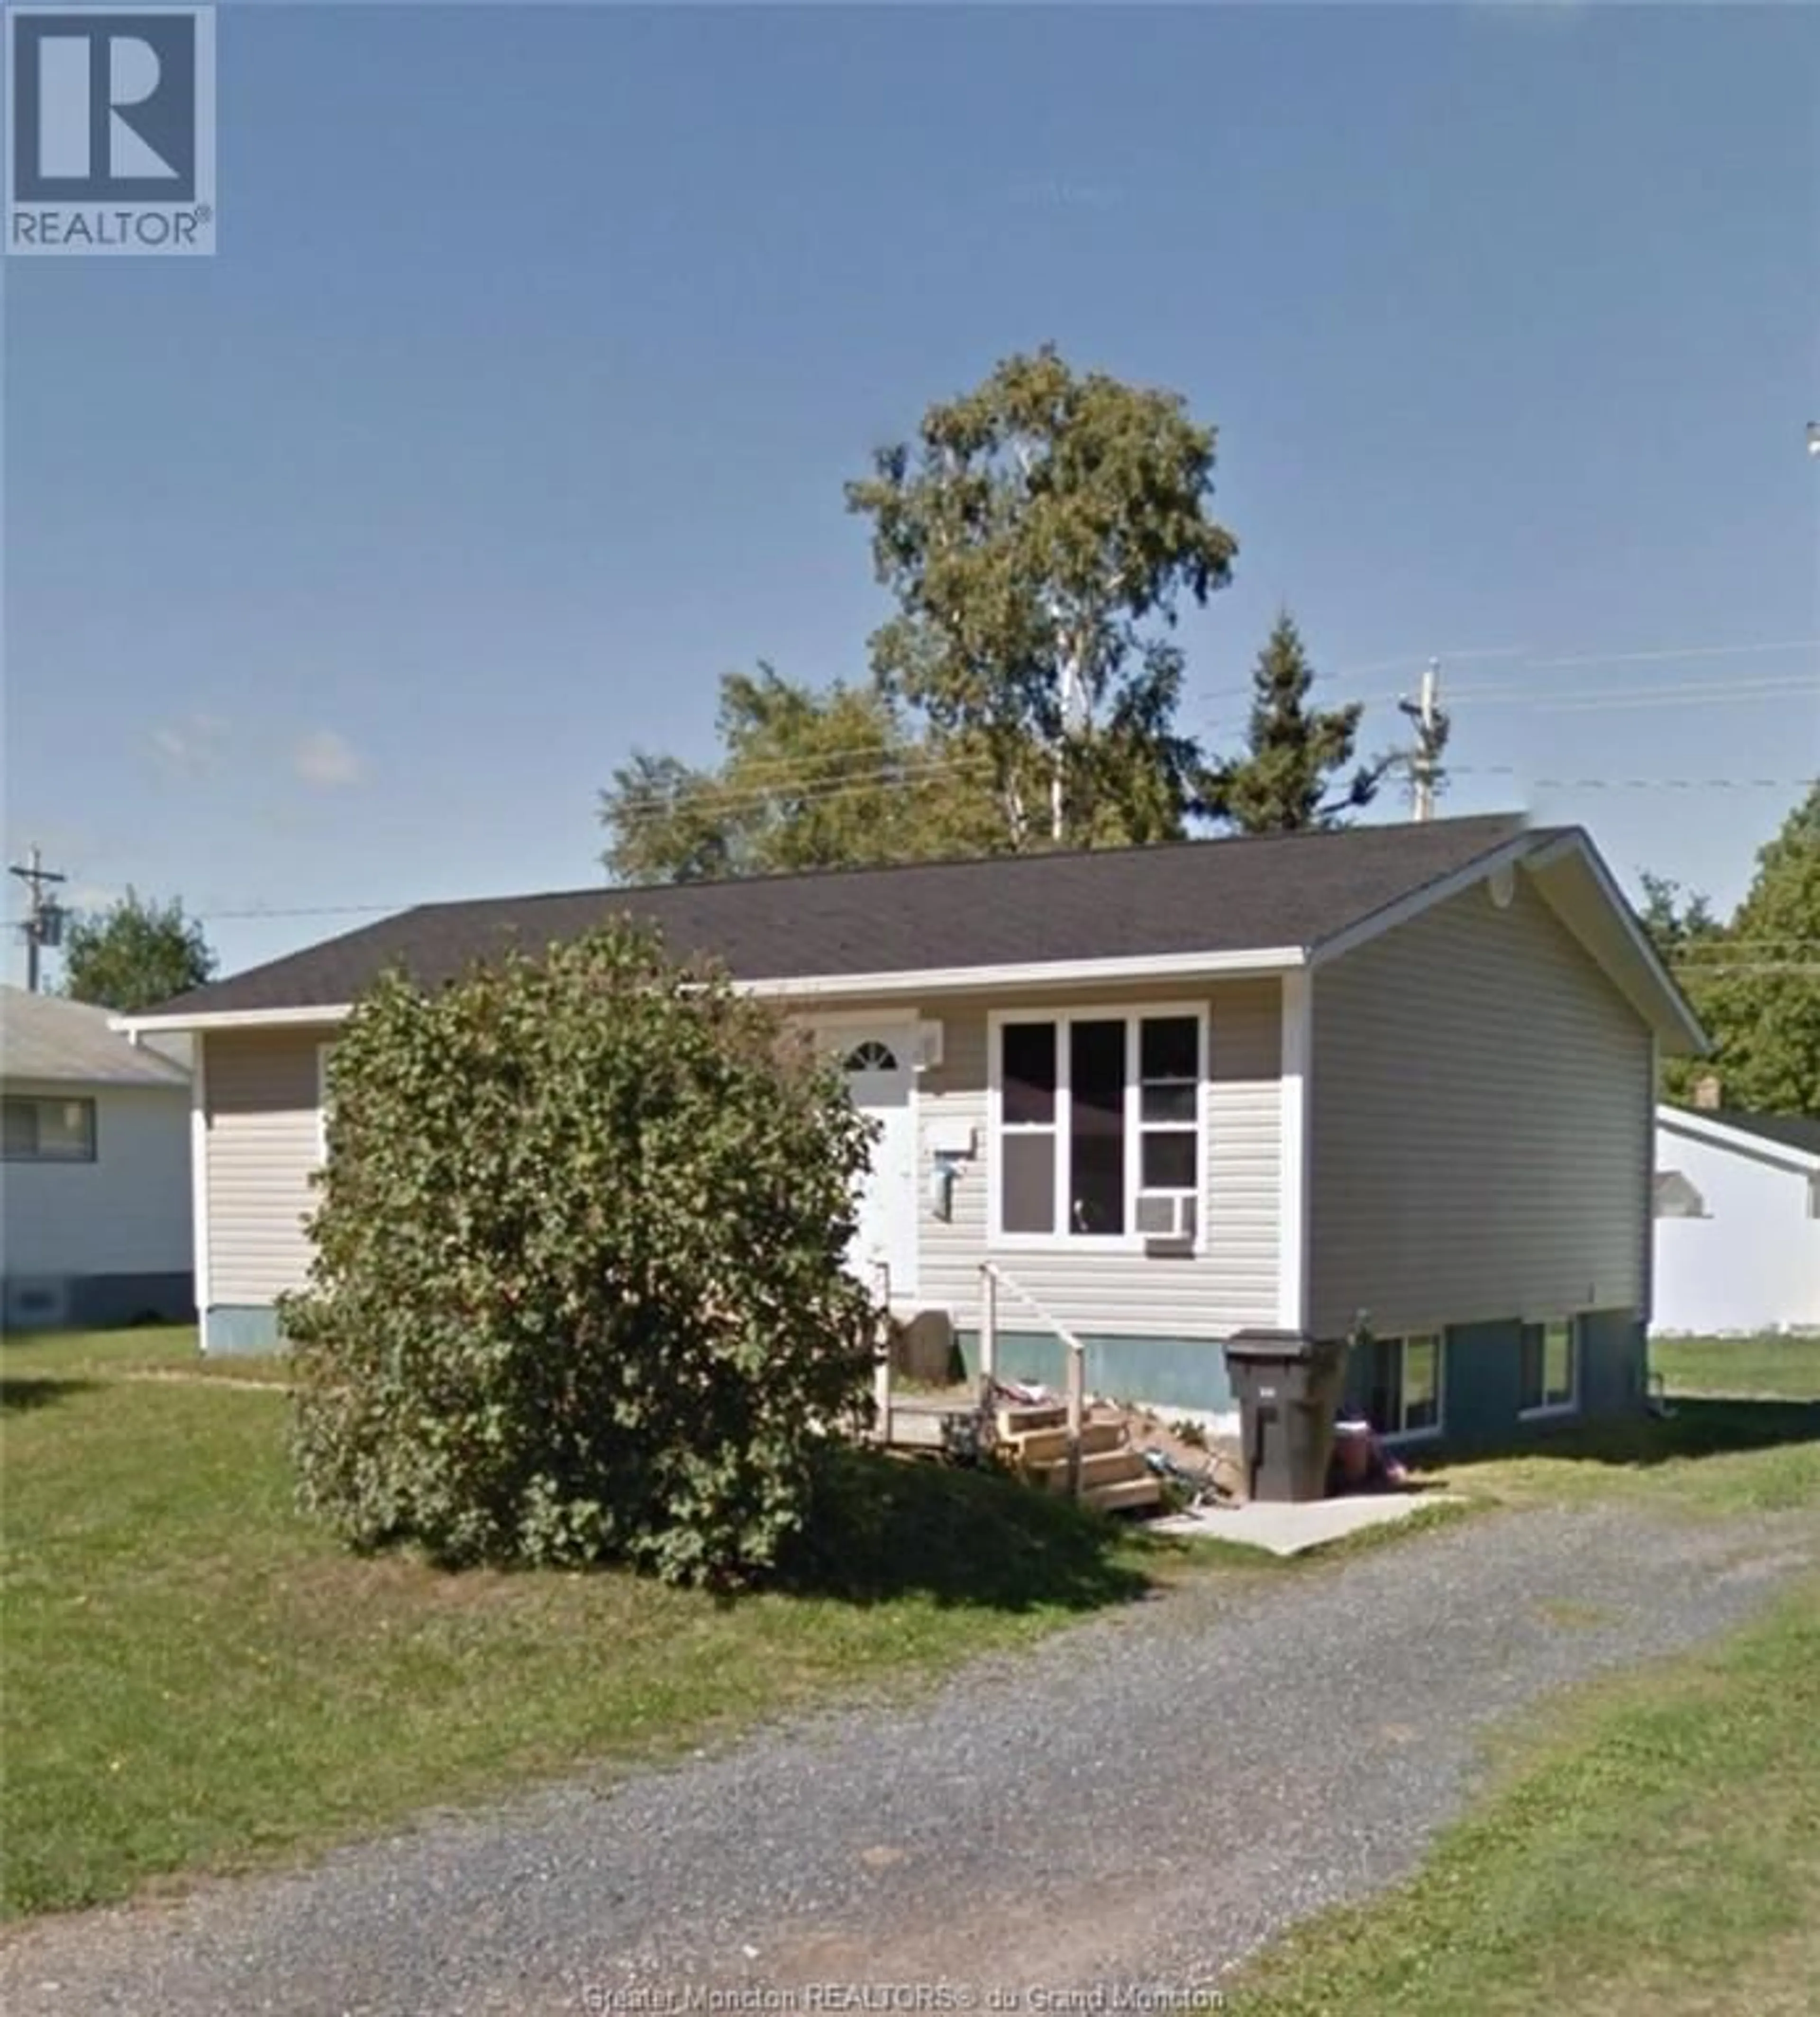 Home with unknown exterior material for 1220 Vantassell, Bathurst New Brunswick E2A4C8